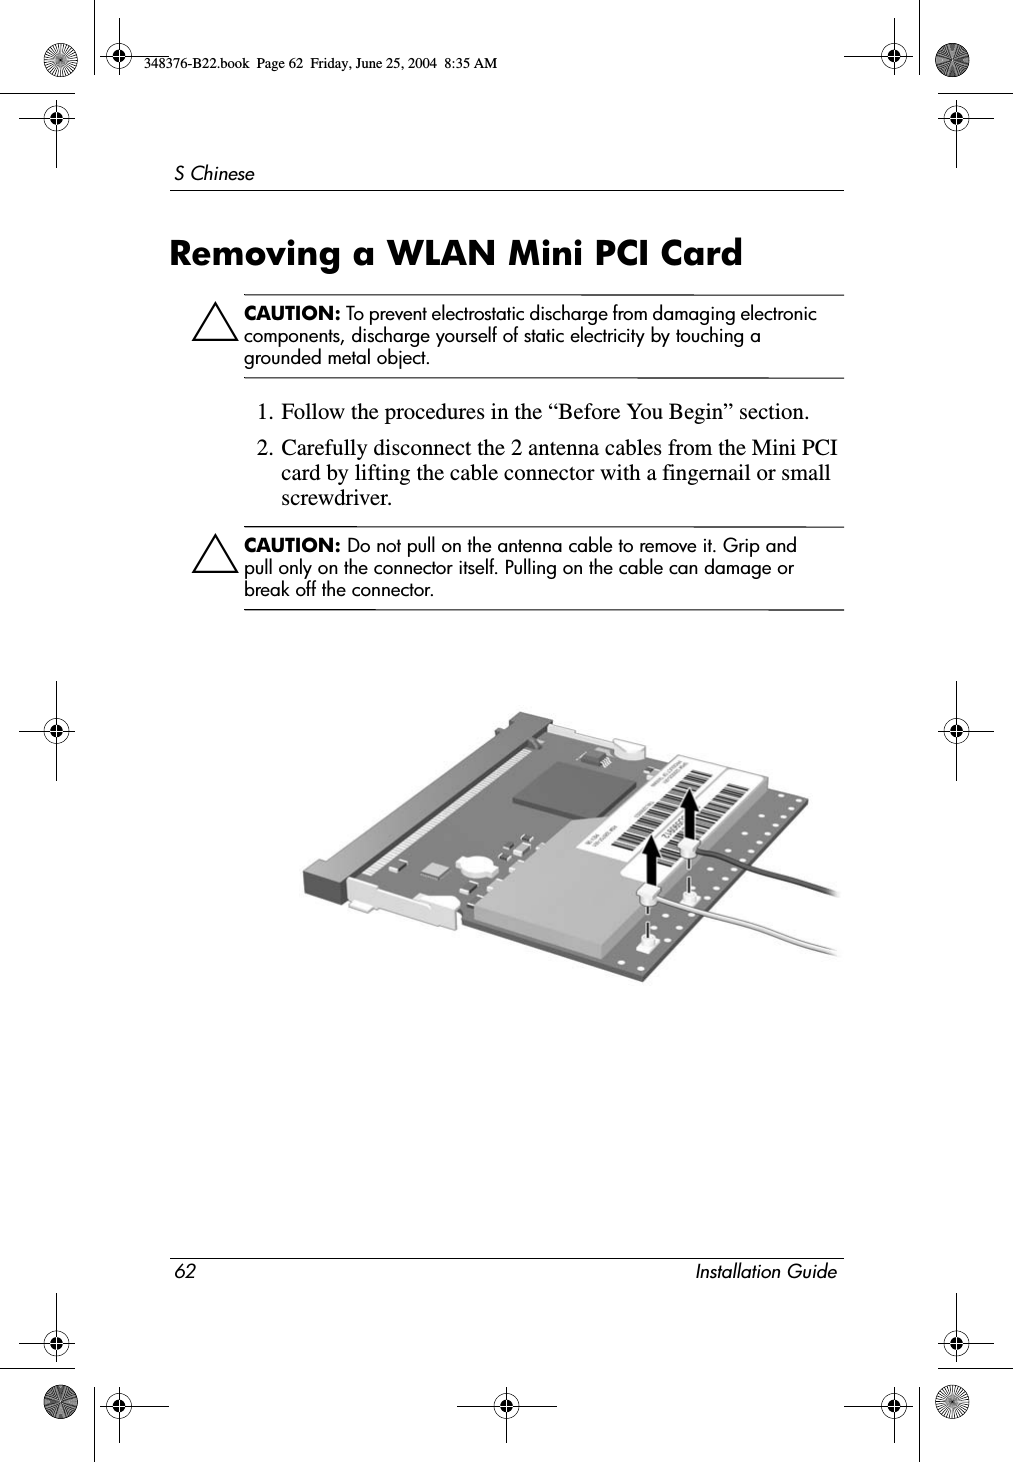 62 Installation GuideS ChineseRemoving a WLAN Mini PCI CardÄCAUTION: To prevent electrostatic discharge from damaging electronic components, discharge yourself of static electricity by touching a grounded metal object.1. Follow the procedures in the “Before You Begin” section.2. Carefully disconnect the 2 antenna cables from the Mini PCI card by lifting the cable connector with a fingernail or small screwdriver.ÄCAUTION: Do not pull on the antenna cable to remove it. Grip and pull only on the connector itself. Pulling on the cable can damage or break off the connector.348376-B22.book  Page 62  Friday, June 25, 2004  8:35 AM